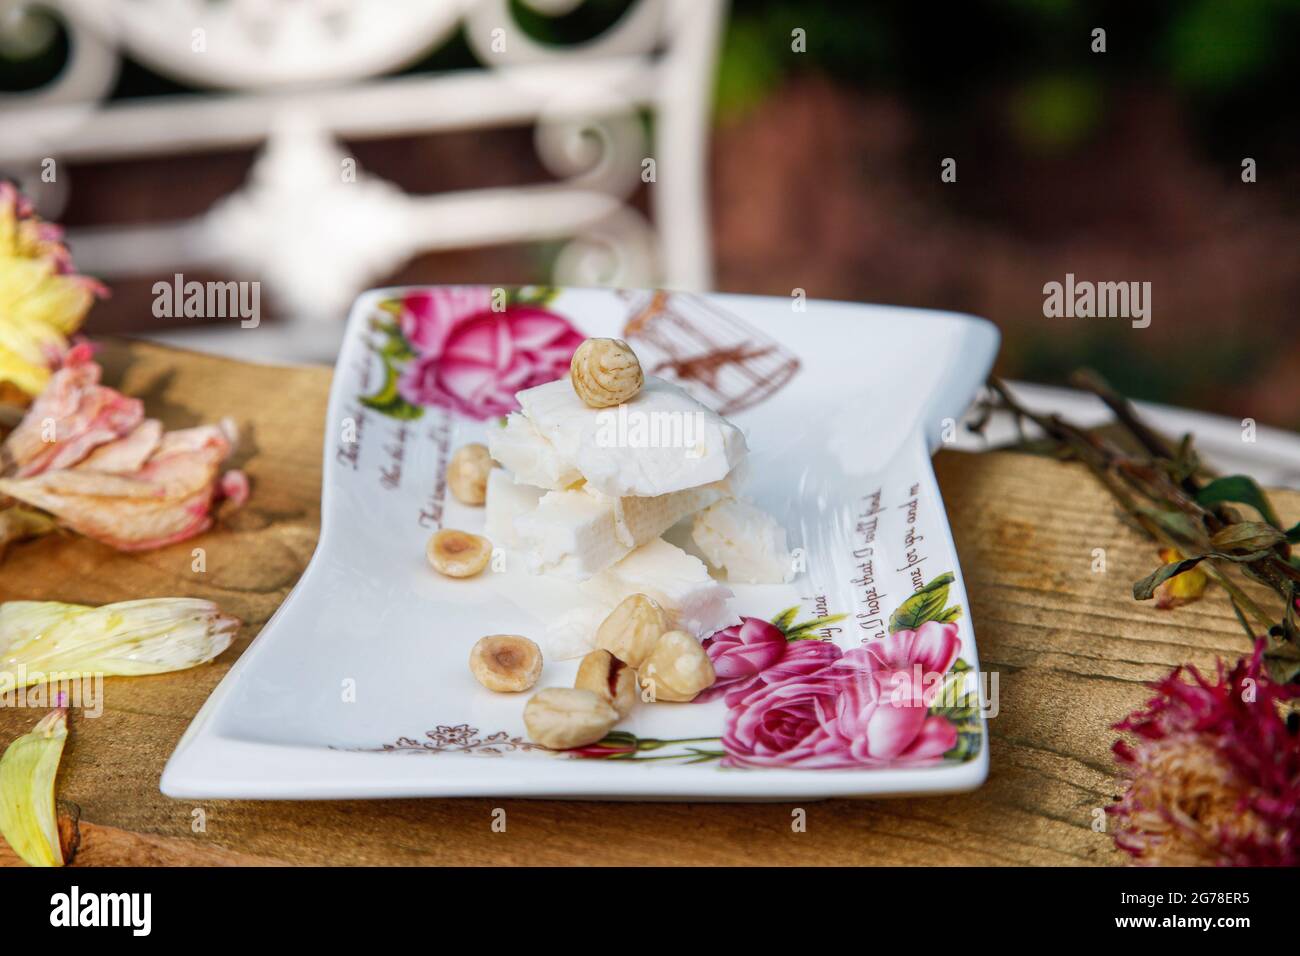 Cheese, hazelnuts, specialty, food styling, still life, blossoms, garden, October, autumn Stock Photo